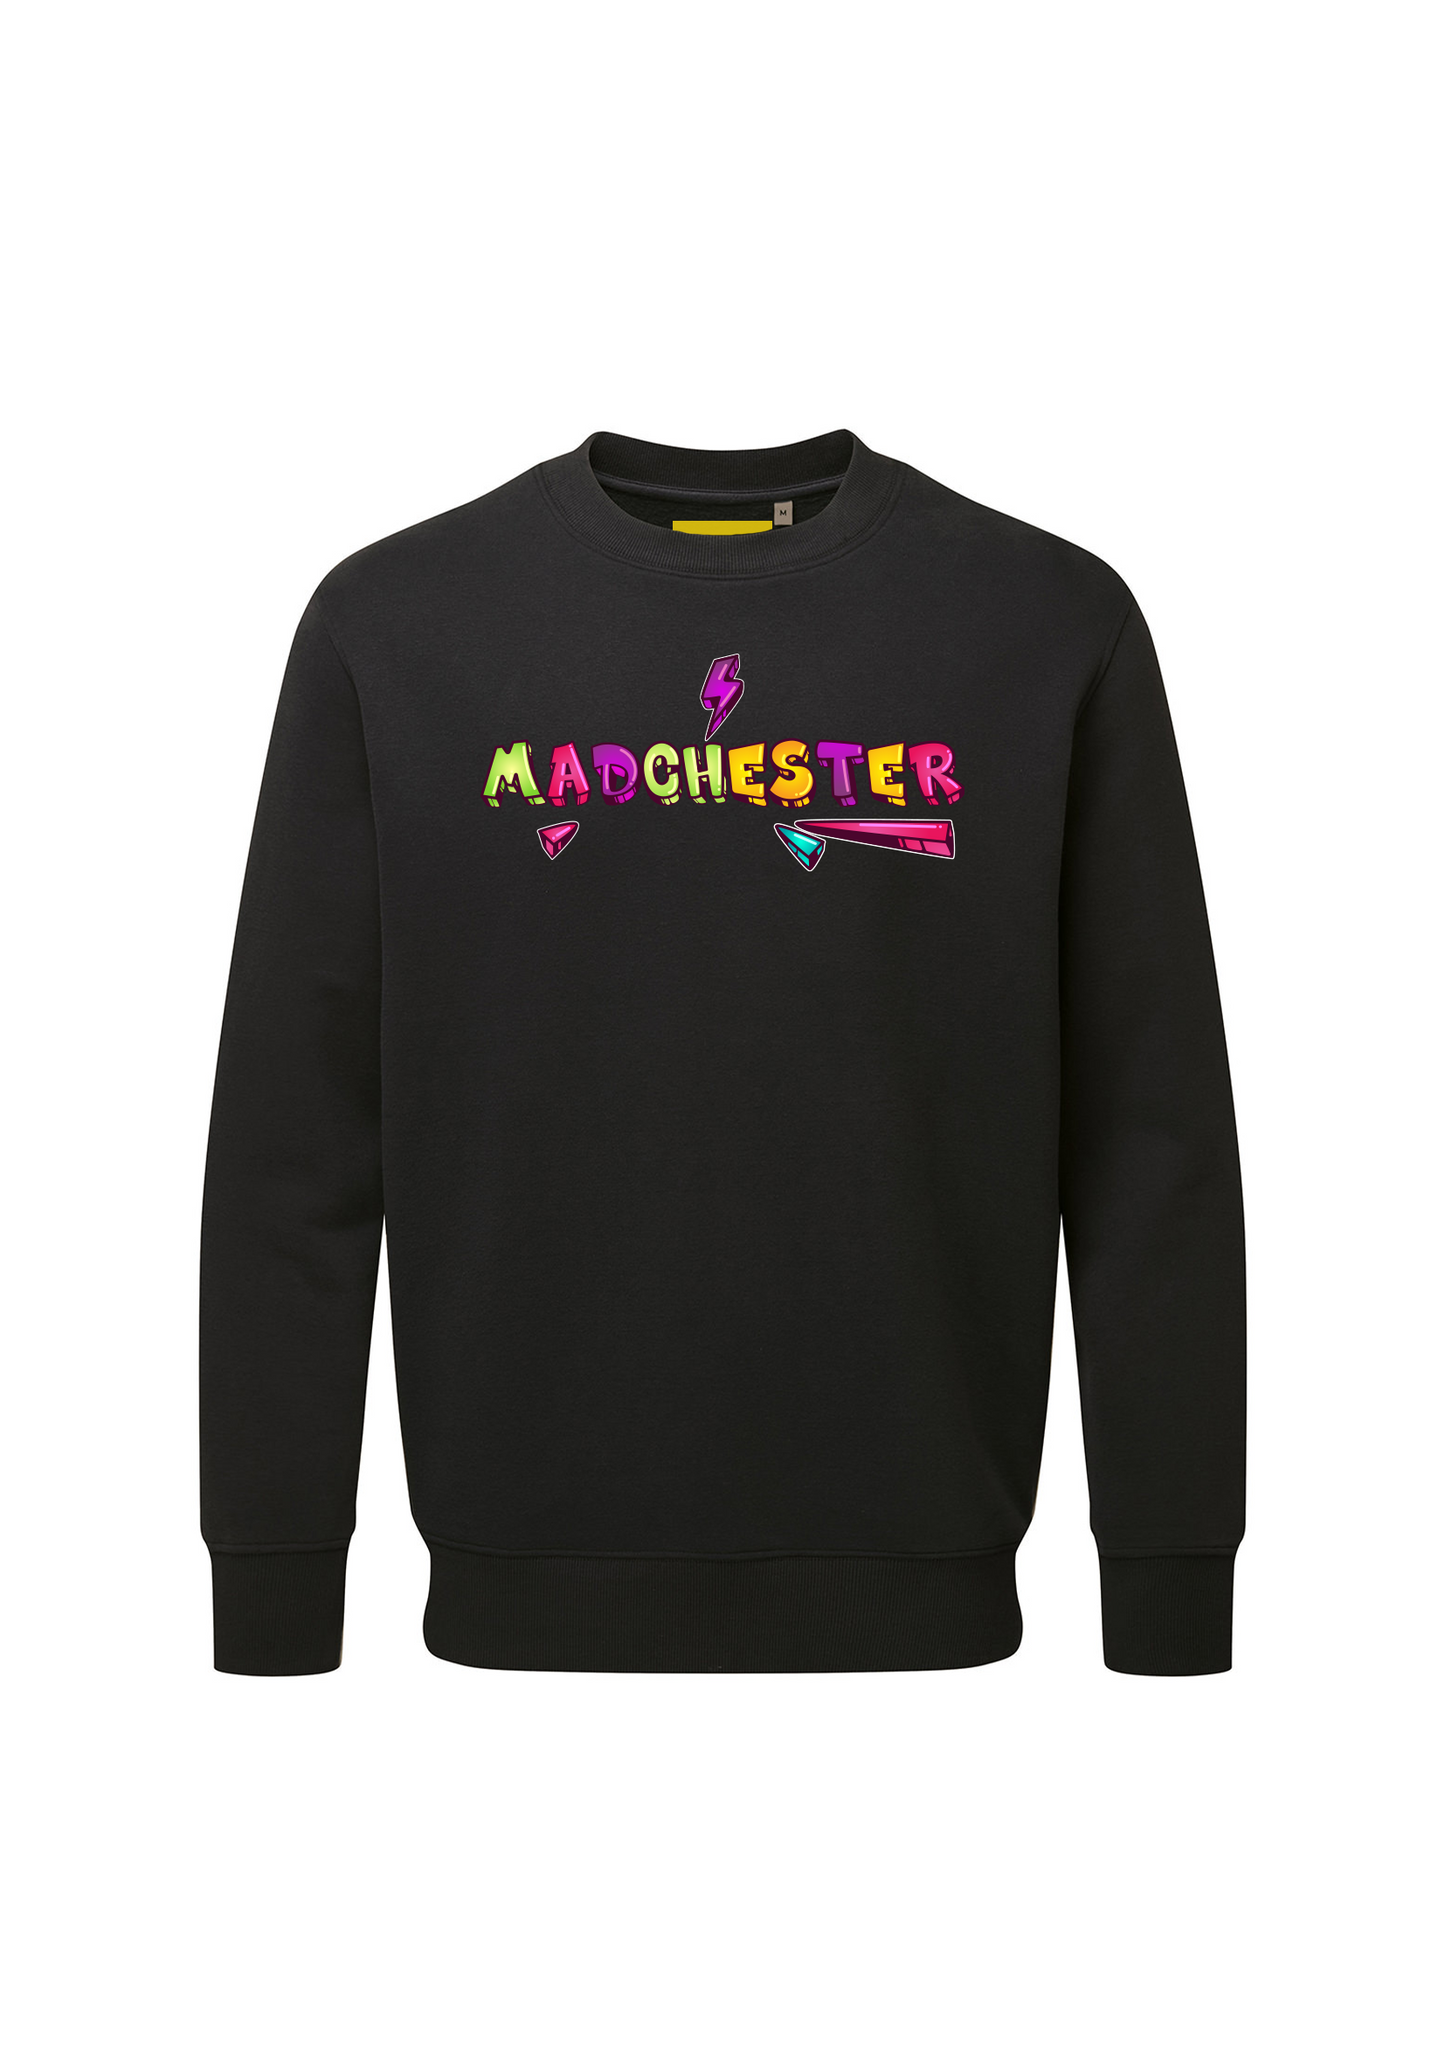 MADCHESTER CRYSALS CREW SWEAT